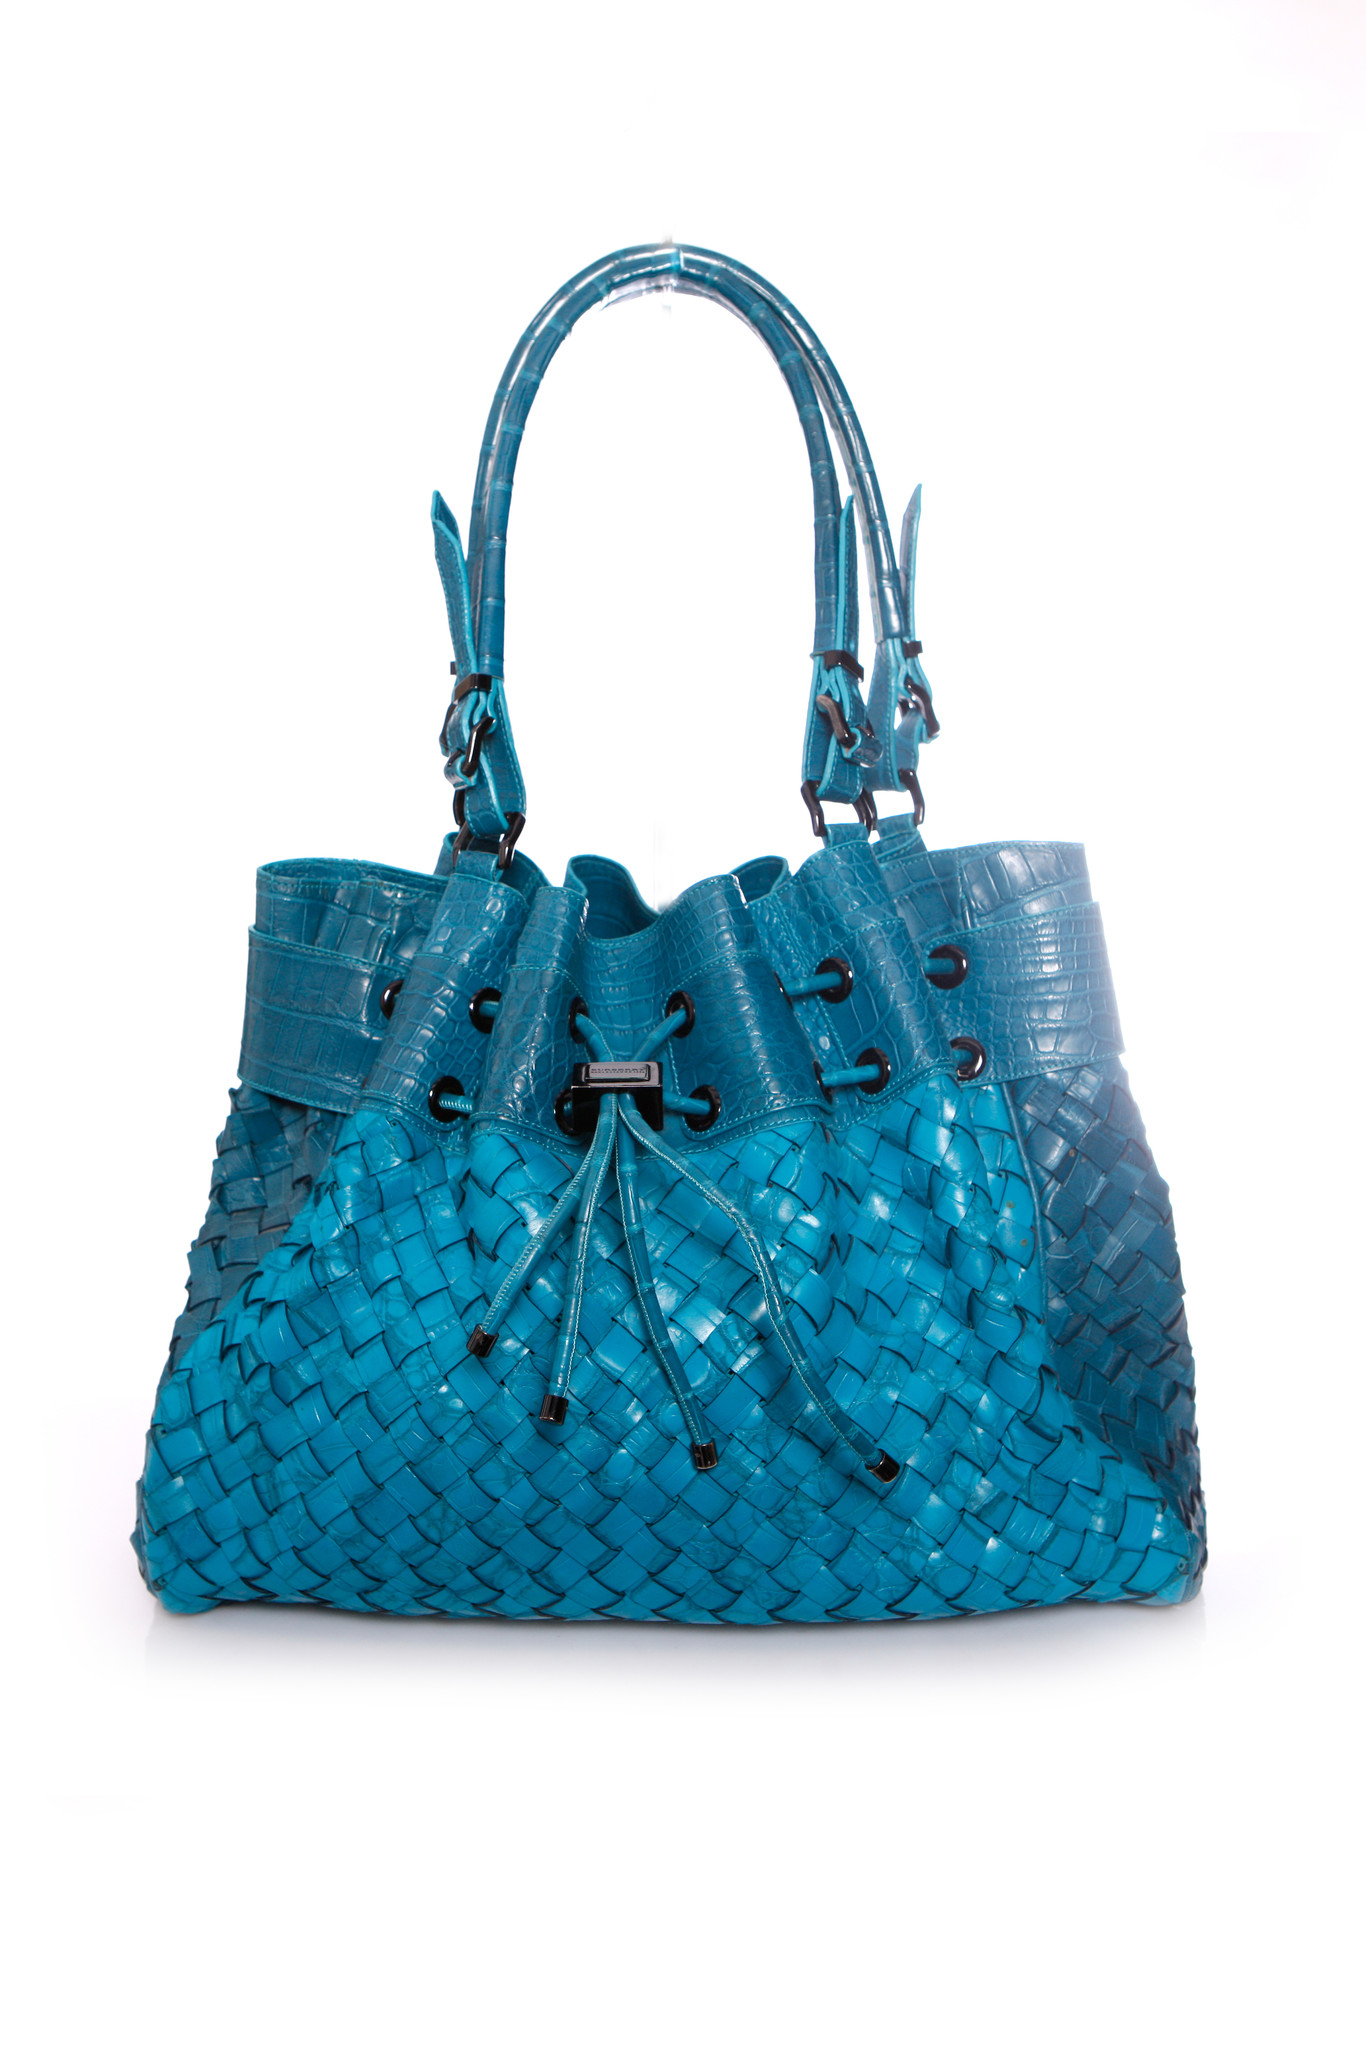 Burberry, turquoise woven leather bag with embossed croc print ...